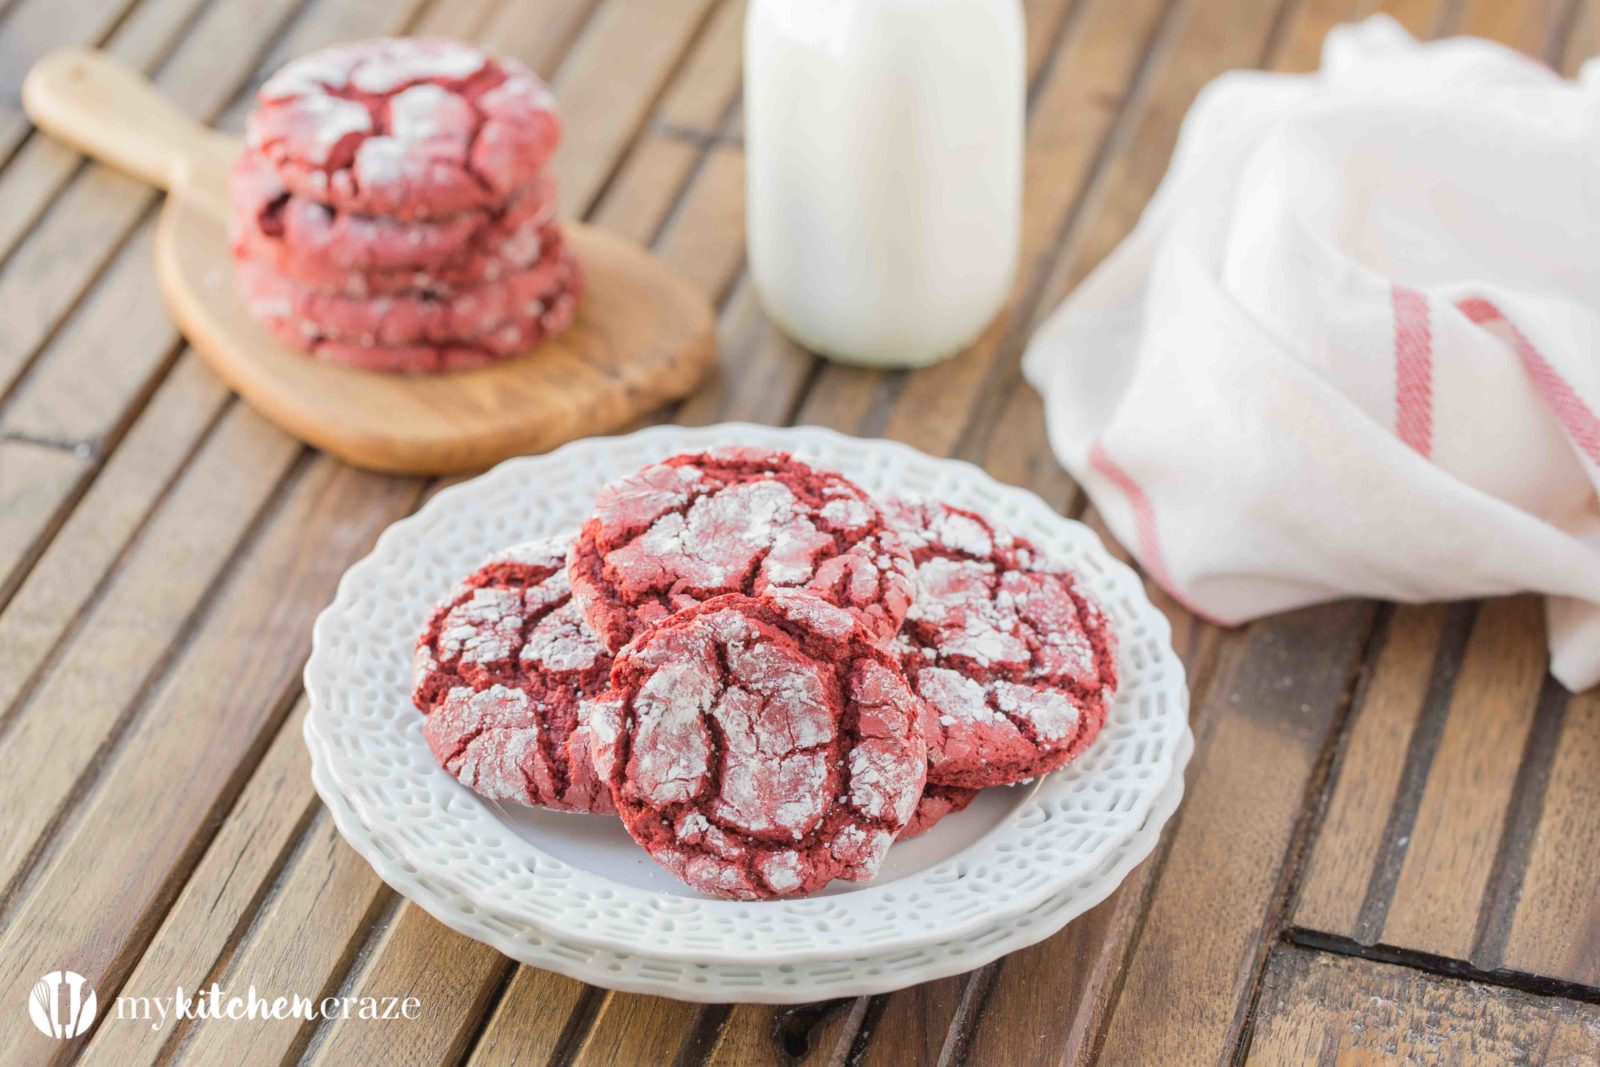 Crunchy around the edges and soft in the center, these Red Velvet Crinkle Cookies can be a great treat for Valentine's Day. You won't believe how easy and good these are!